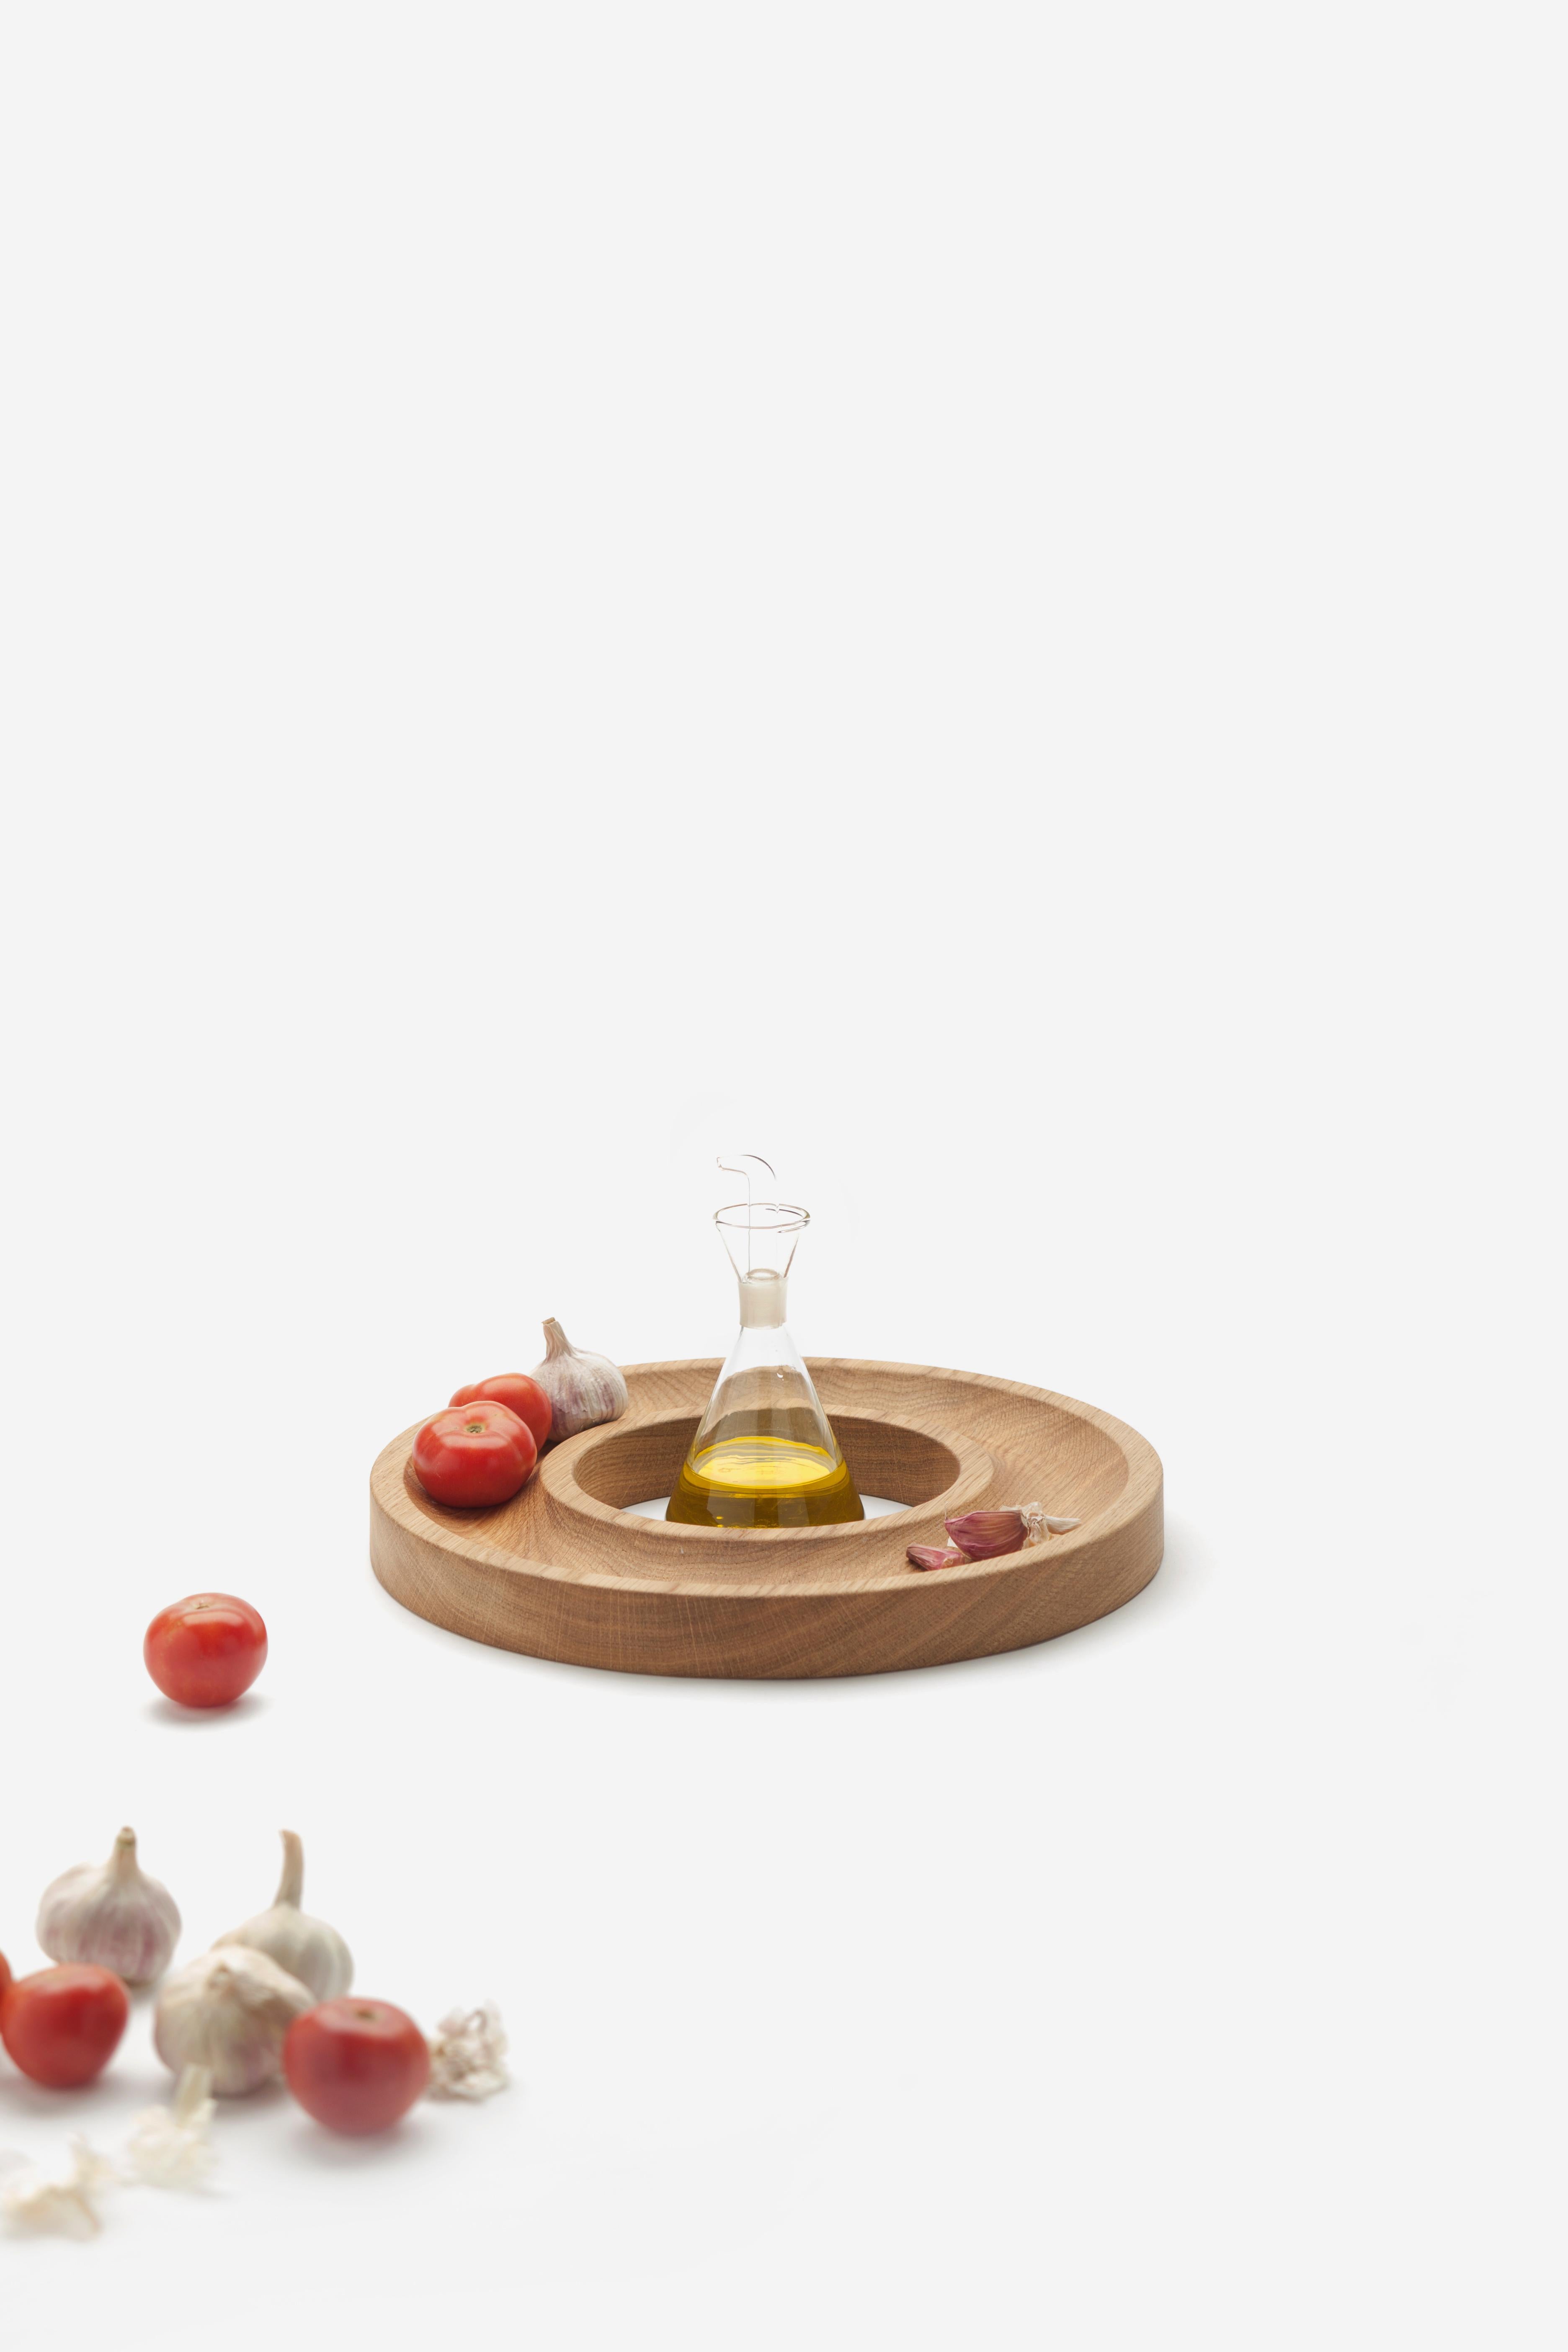 Oak ring tray by Joseph Vila Capdevila
Material: Oak
Dimensions: ø 35 x 3 cm
Weight: 1.25 kg

Aparentment is a space for creation and innovation, experimenting with materials with the goal to develop robust, lasting and timeless designs.
Aparentment